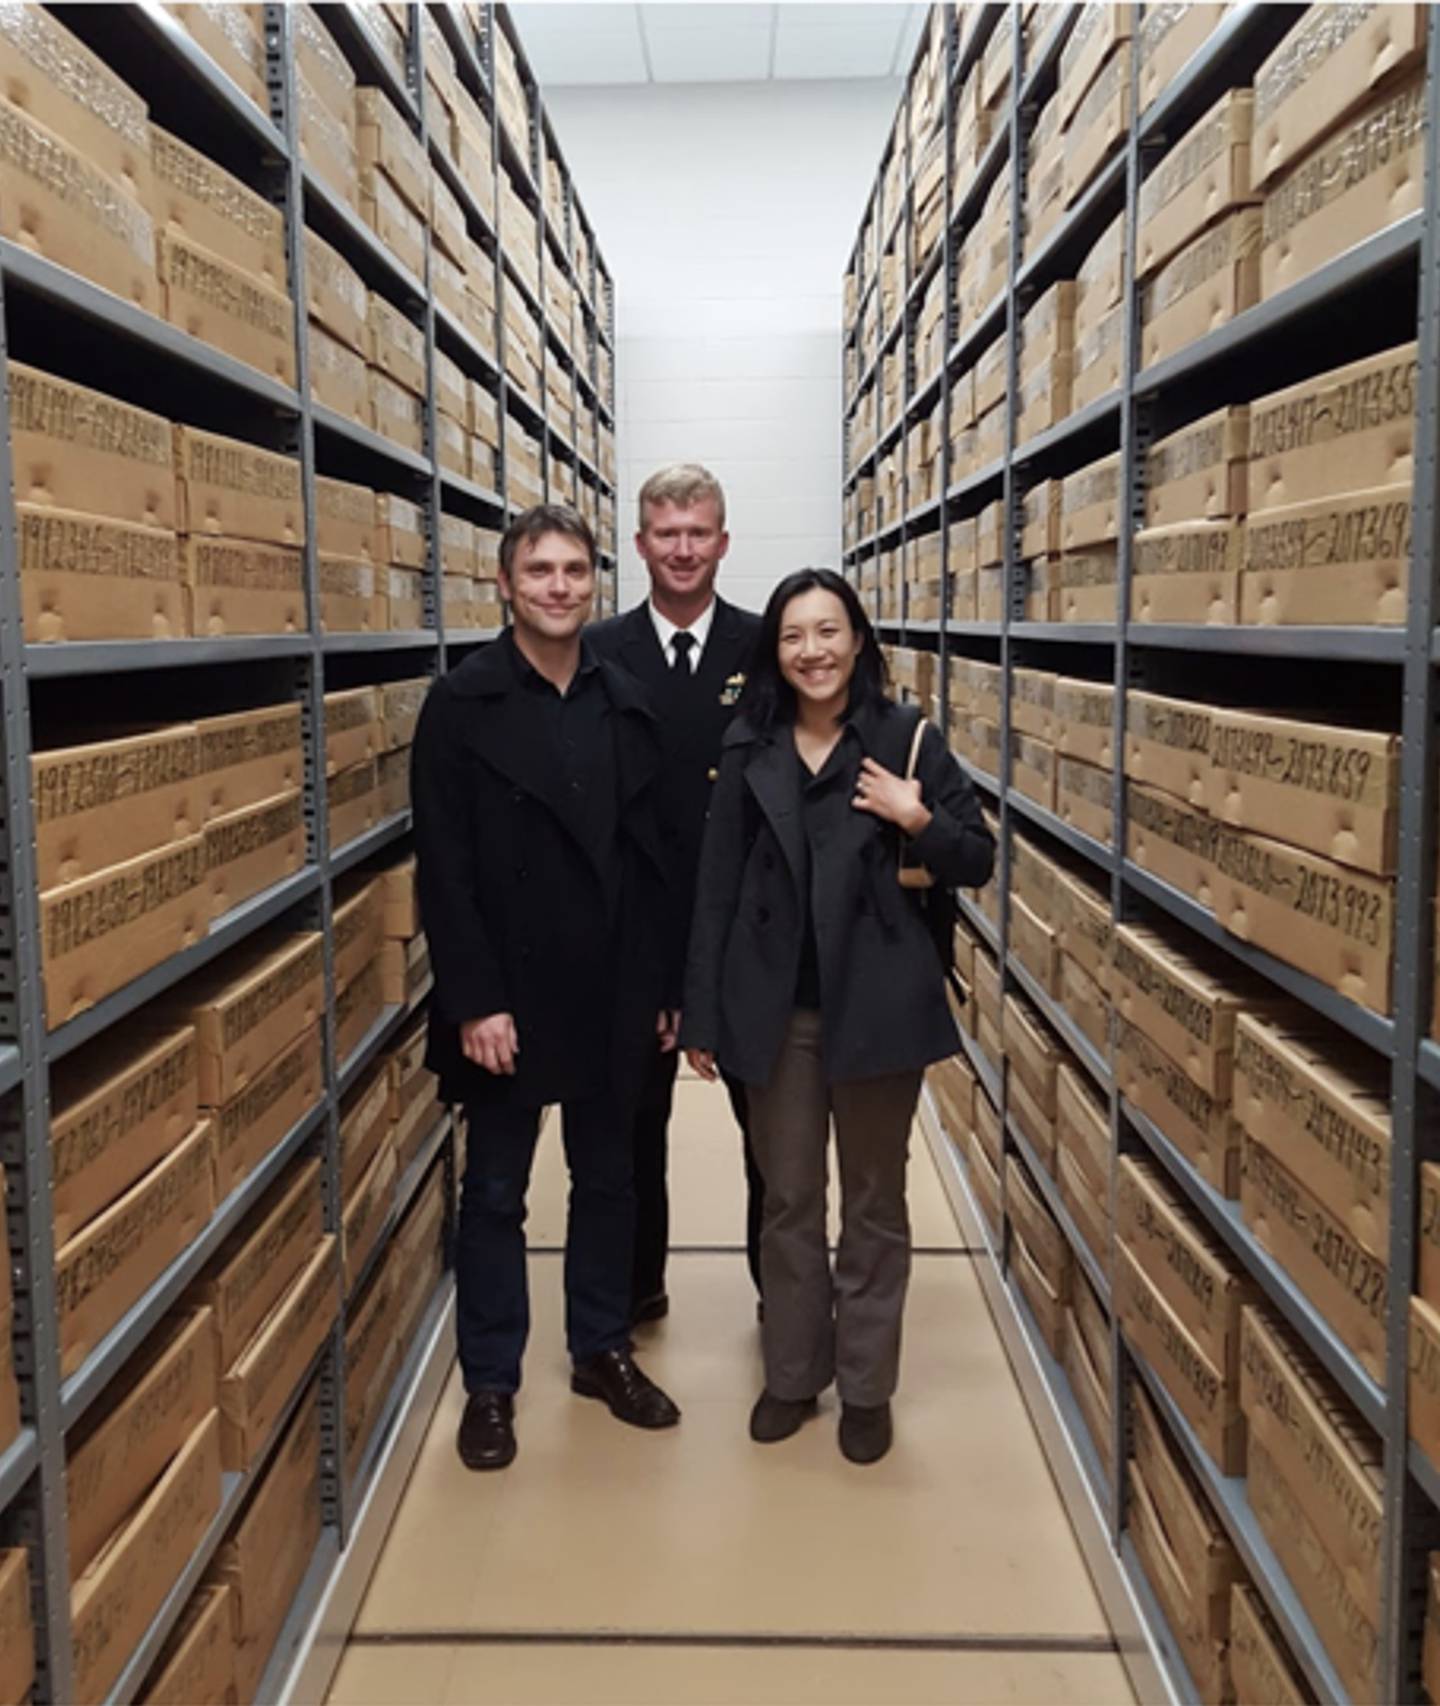 Olson, center, and Google scientists Martin Stumpe and Lily Peng took a private tour of the JPC collection in 2016.